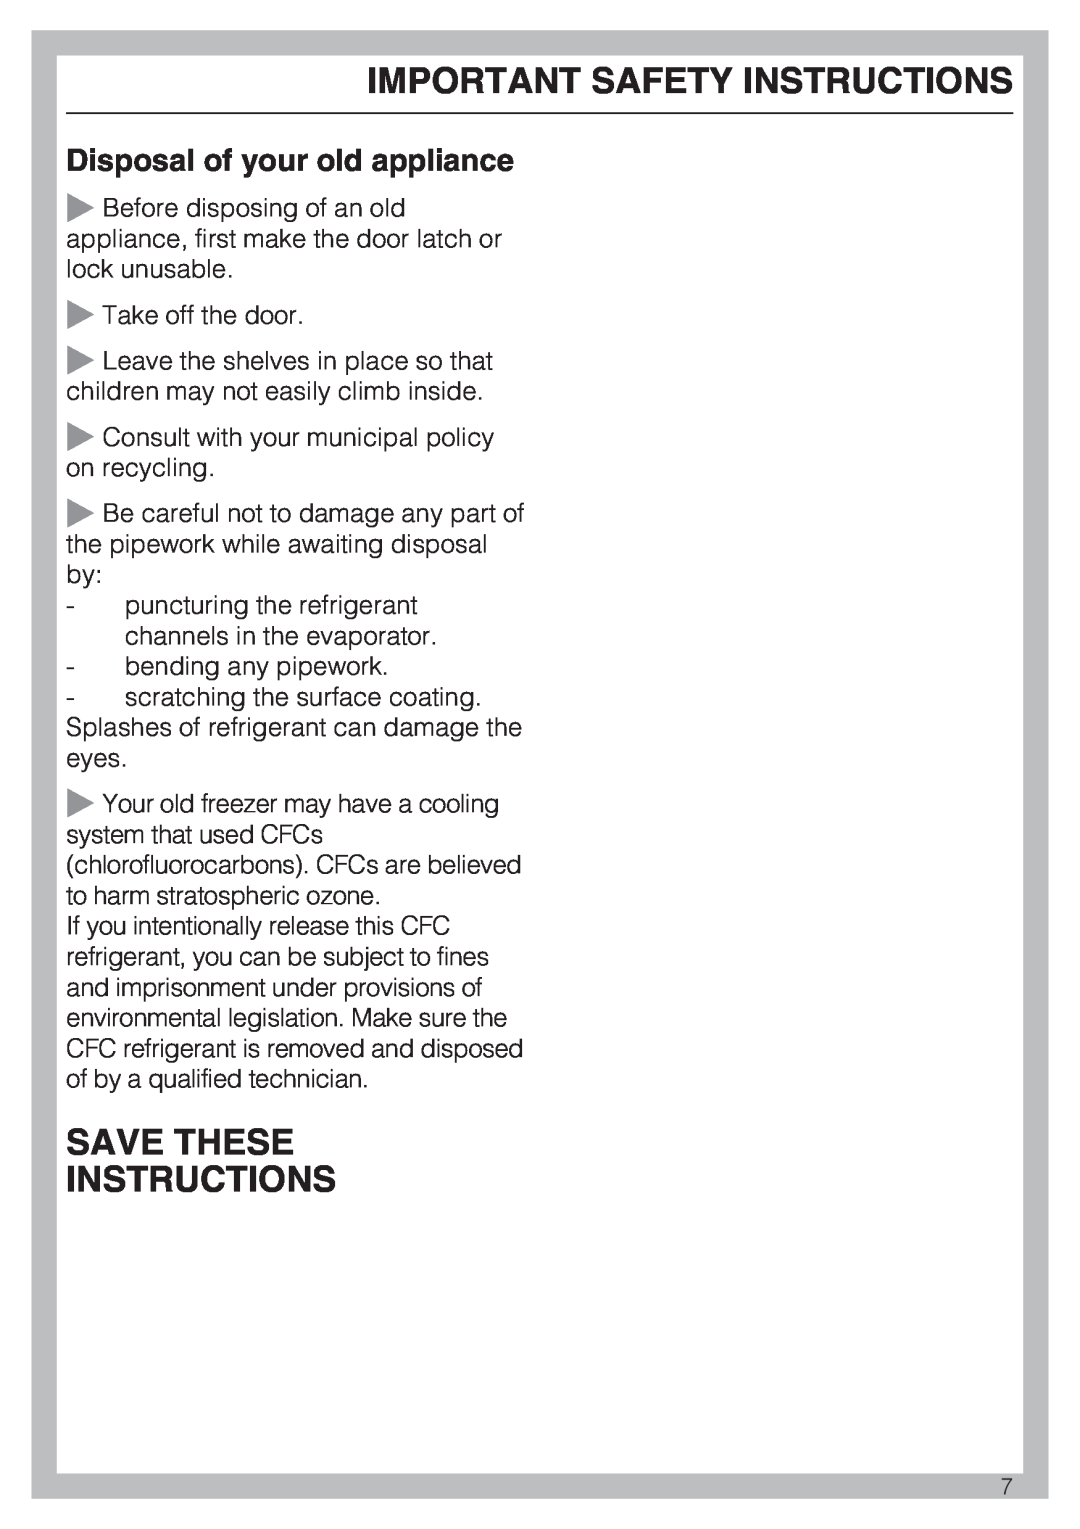 Miele F 1411 Vi Save These Instructions, Disposal of your old appliance, Important Safety Instructions 